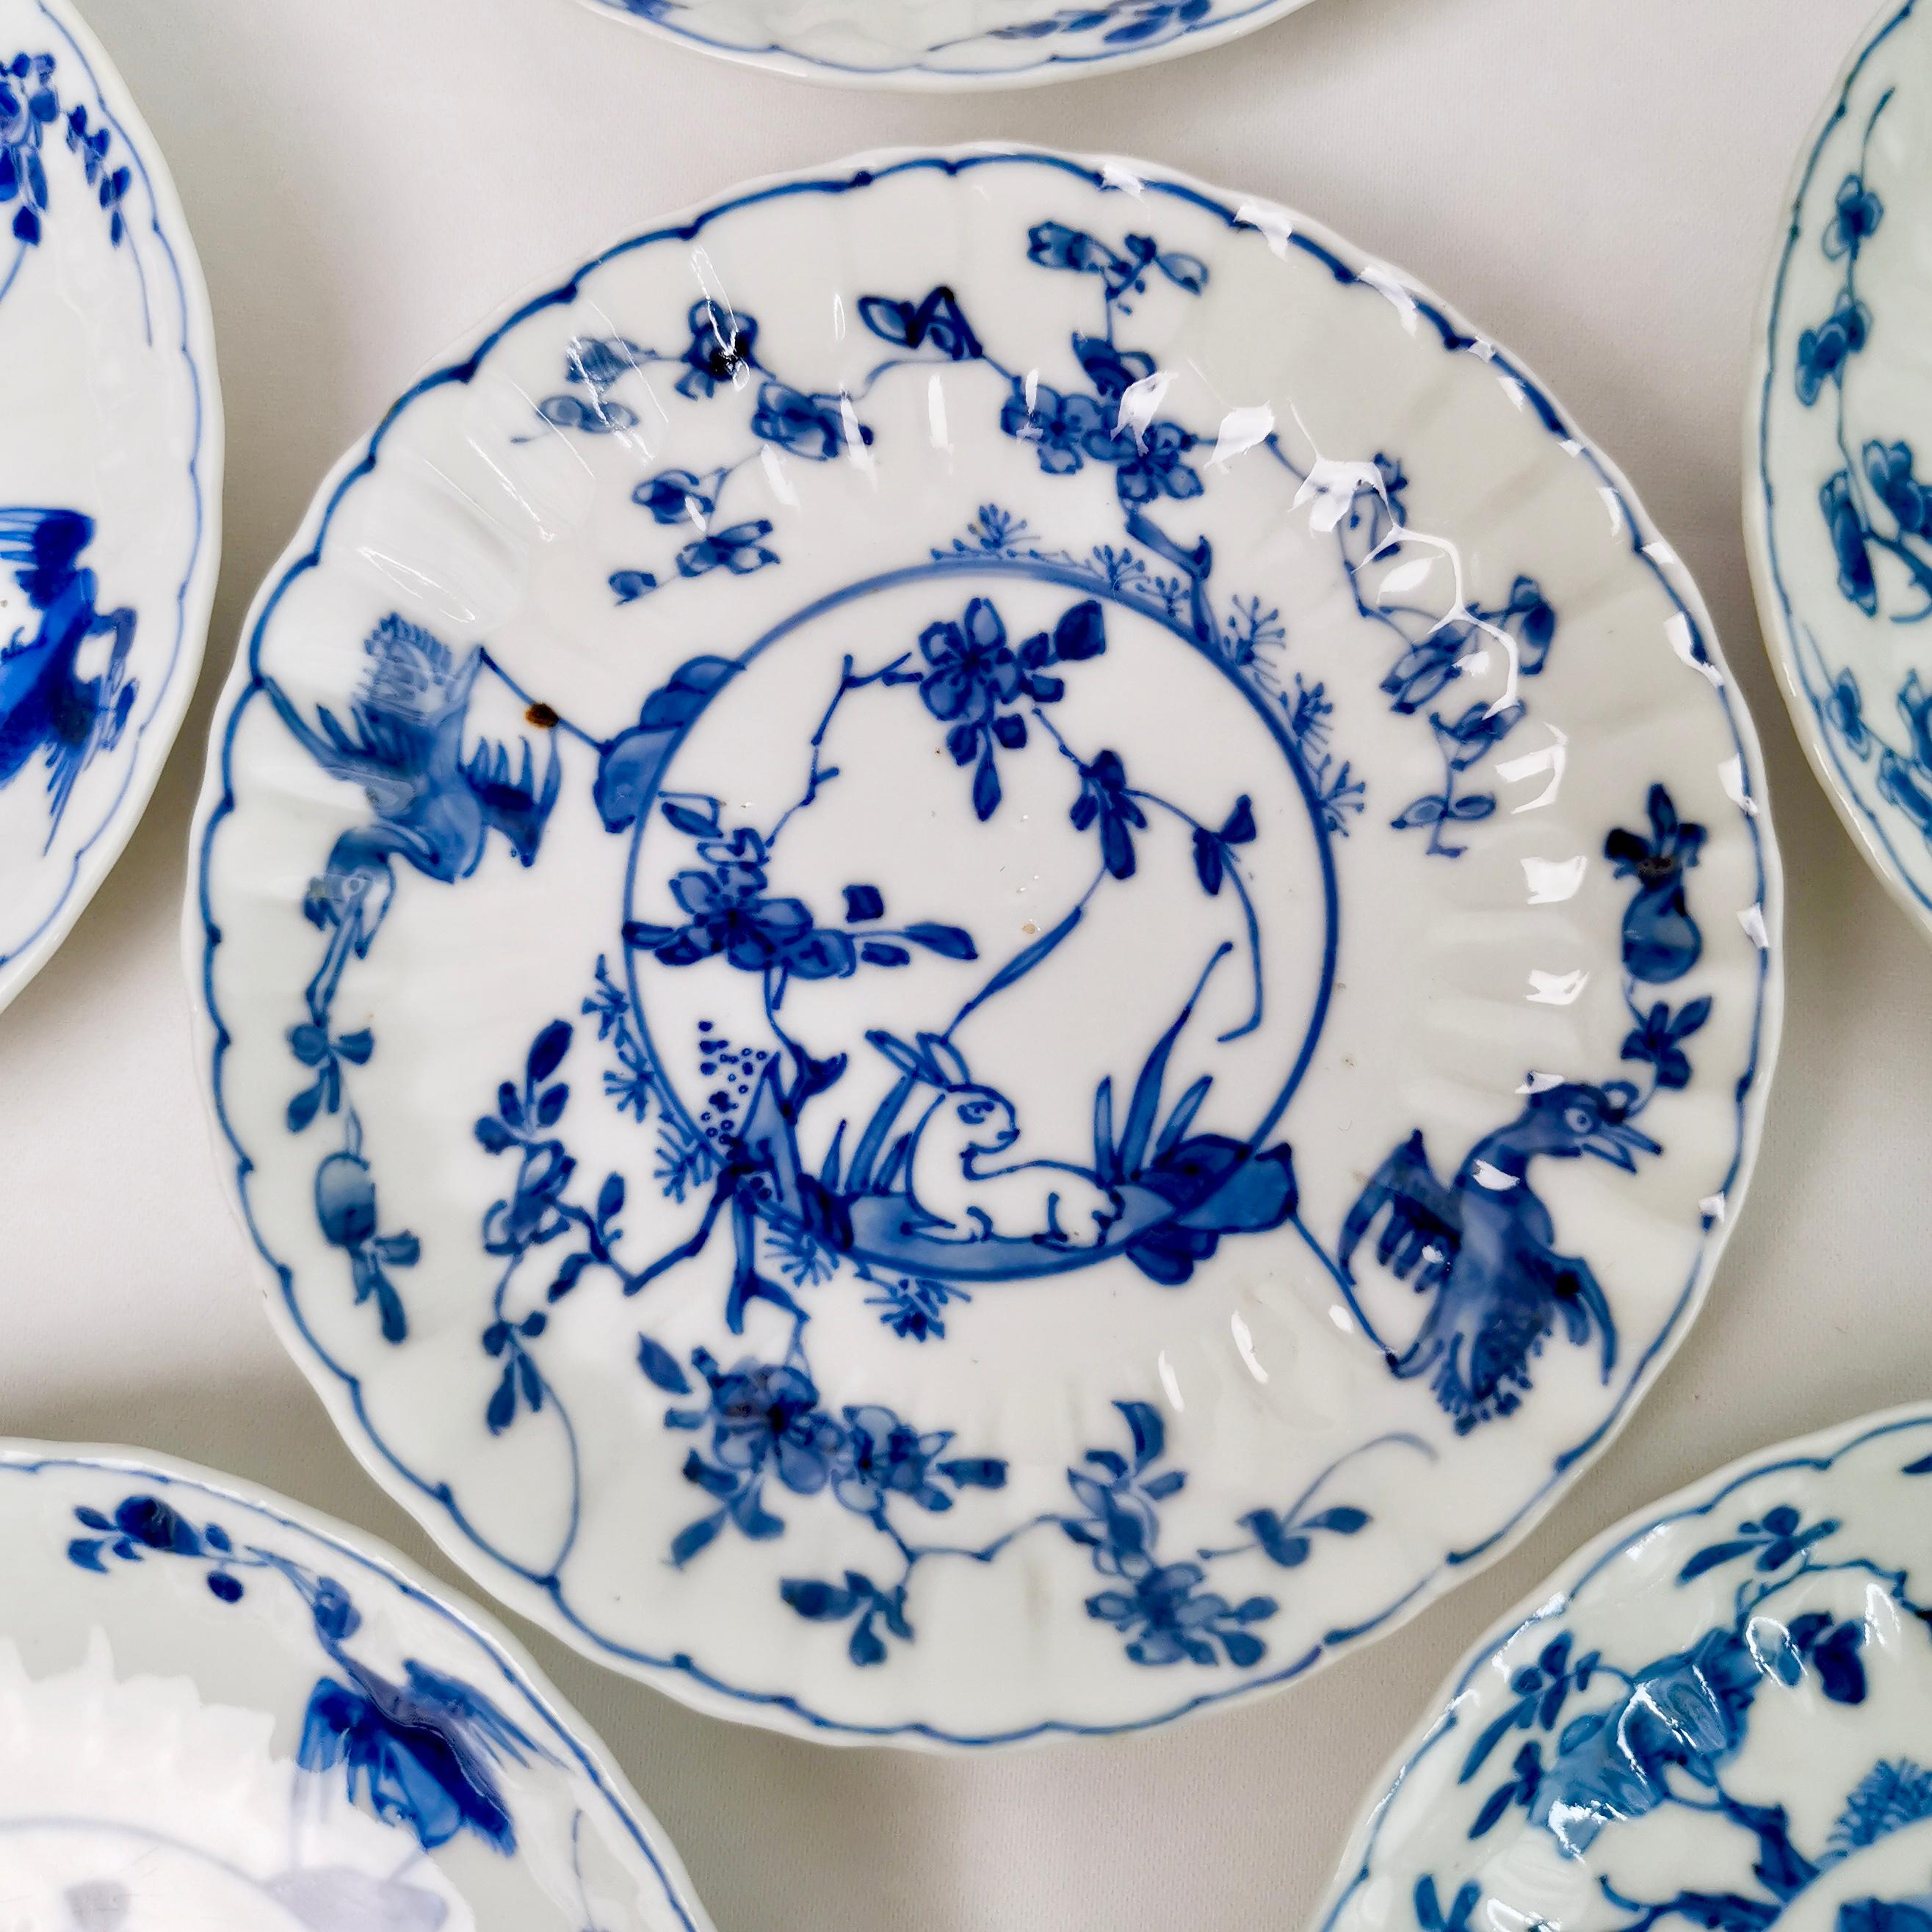 Porcelain Set of Chinese Export Tea Bowls, Rabbits and Cranes, 19th Century Kraak Style